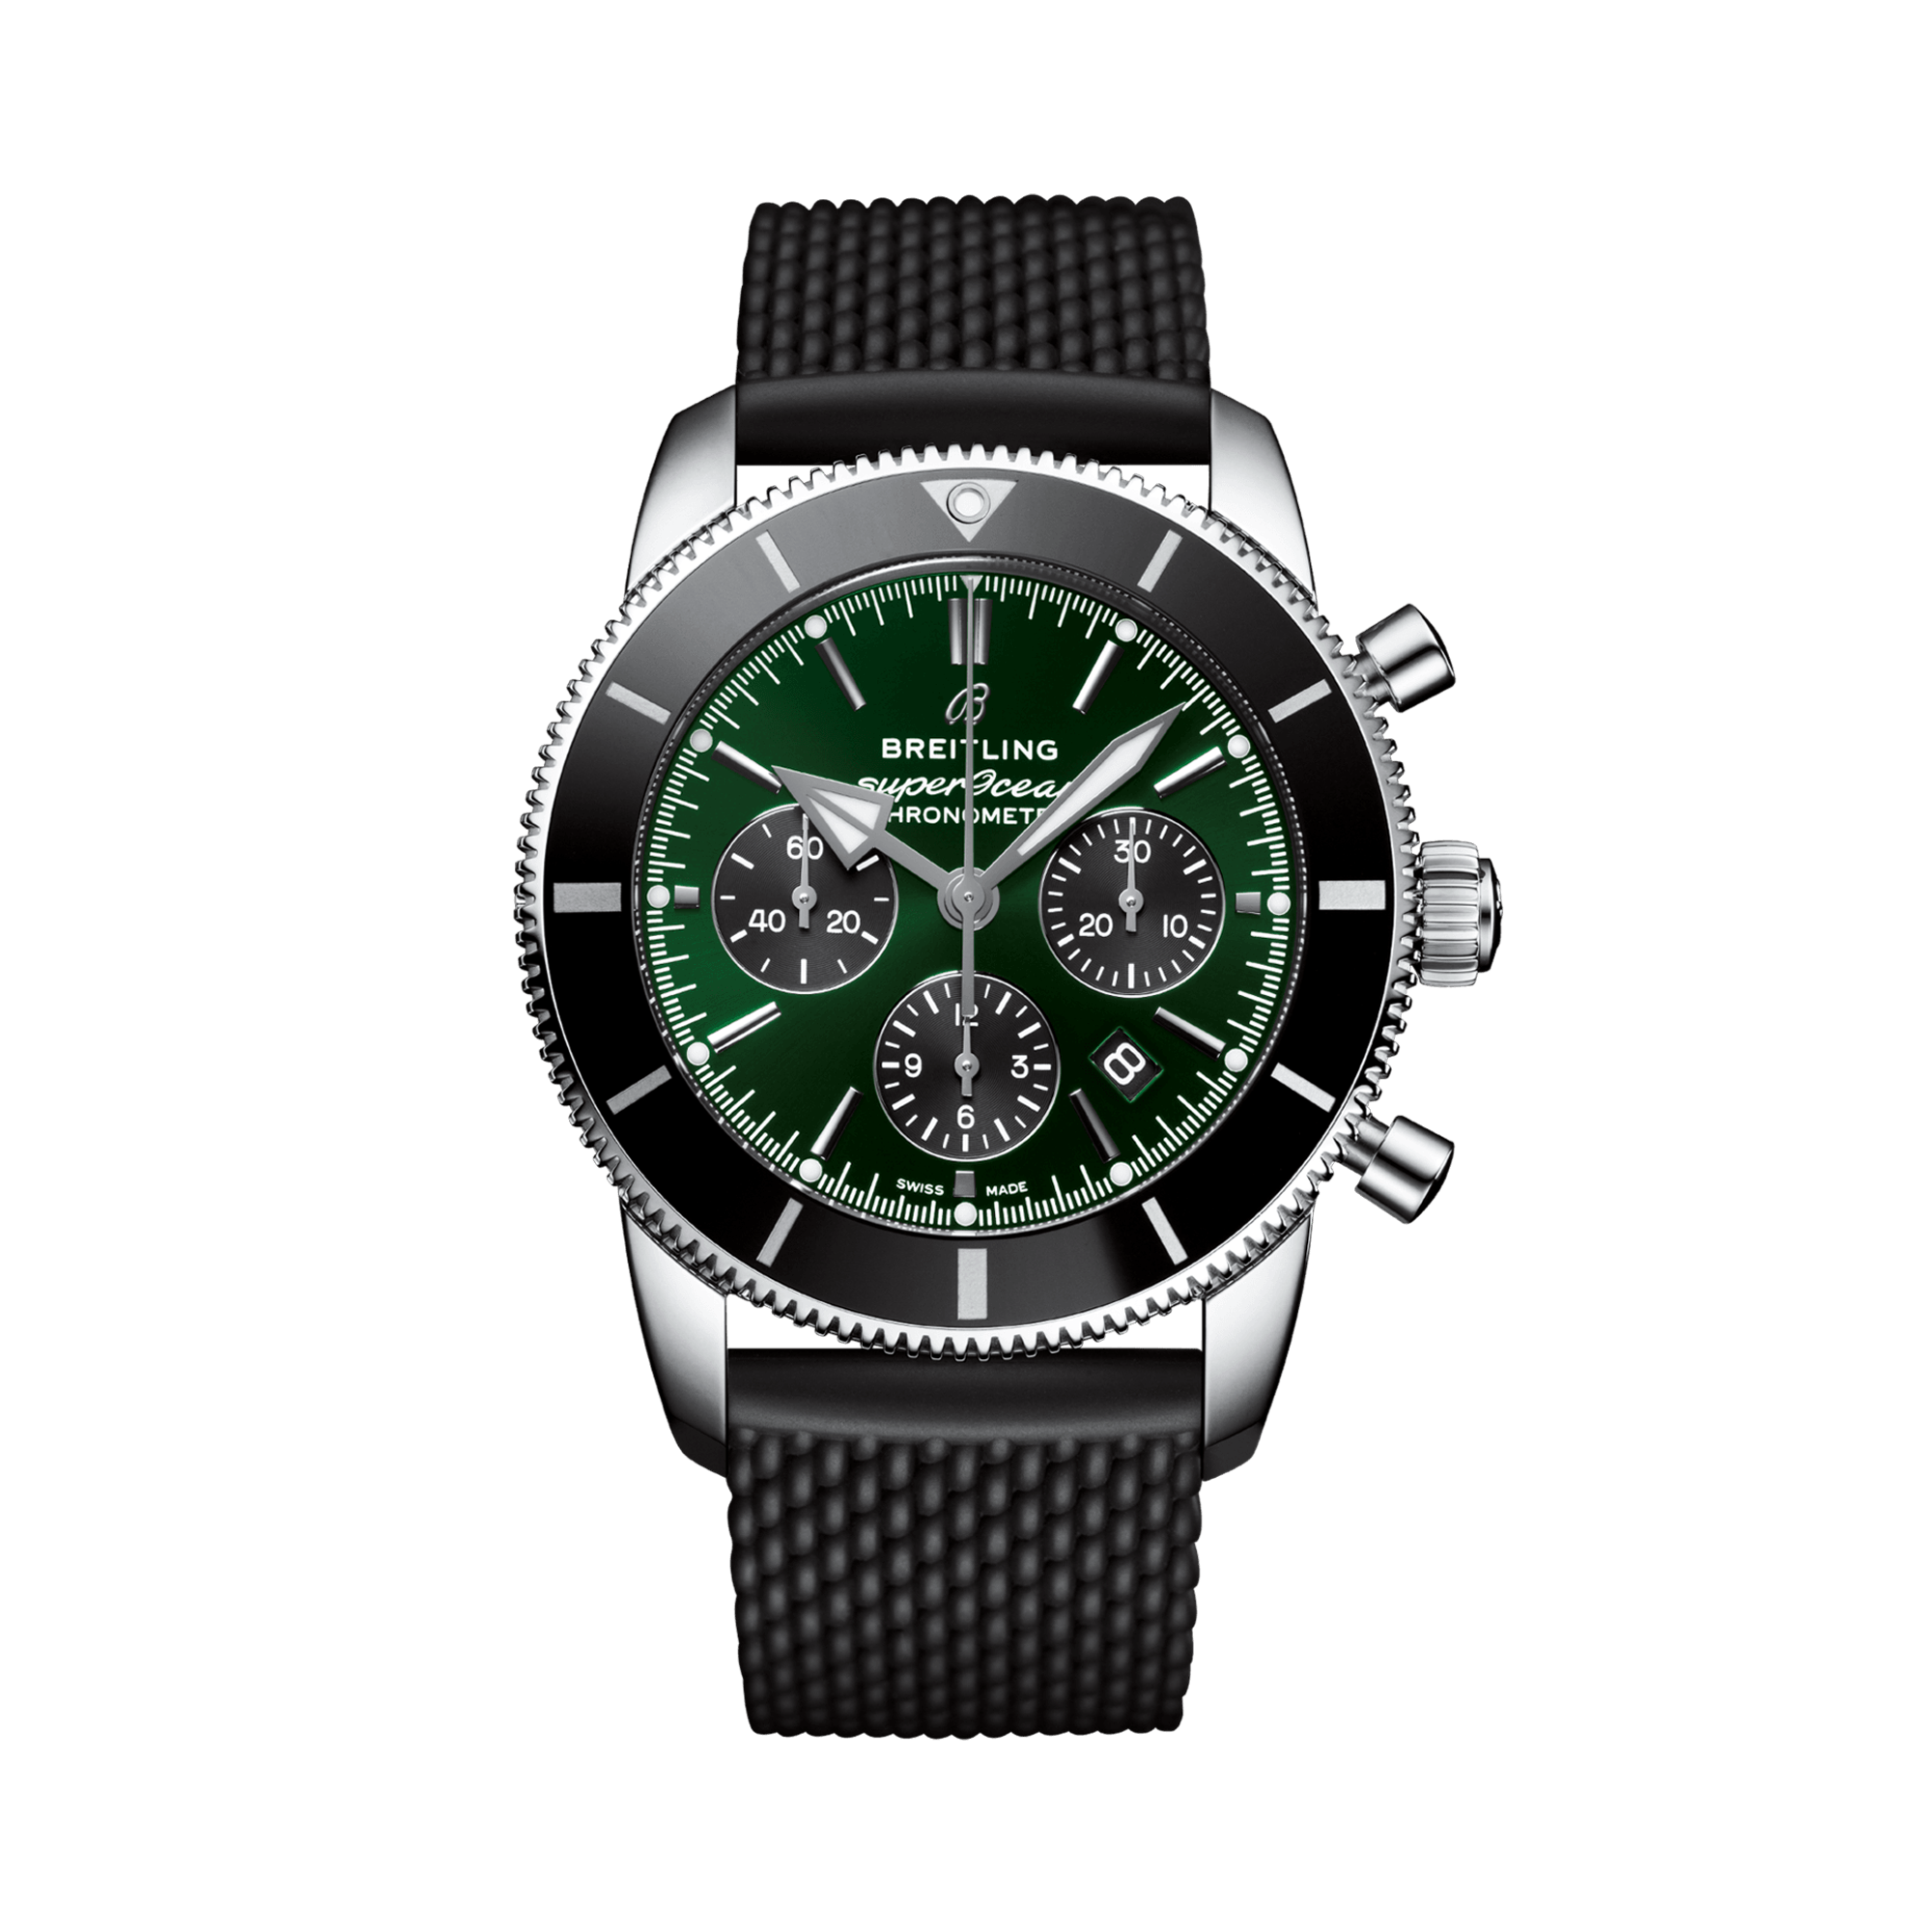 Breitling Superocean Heritage B01 Chronograph 44mm, Green Dial, Baton Numerals_1